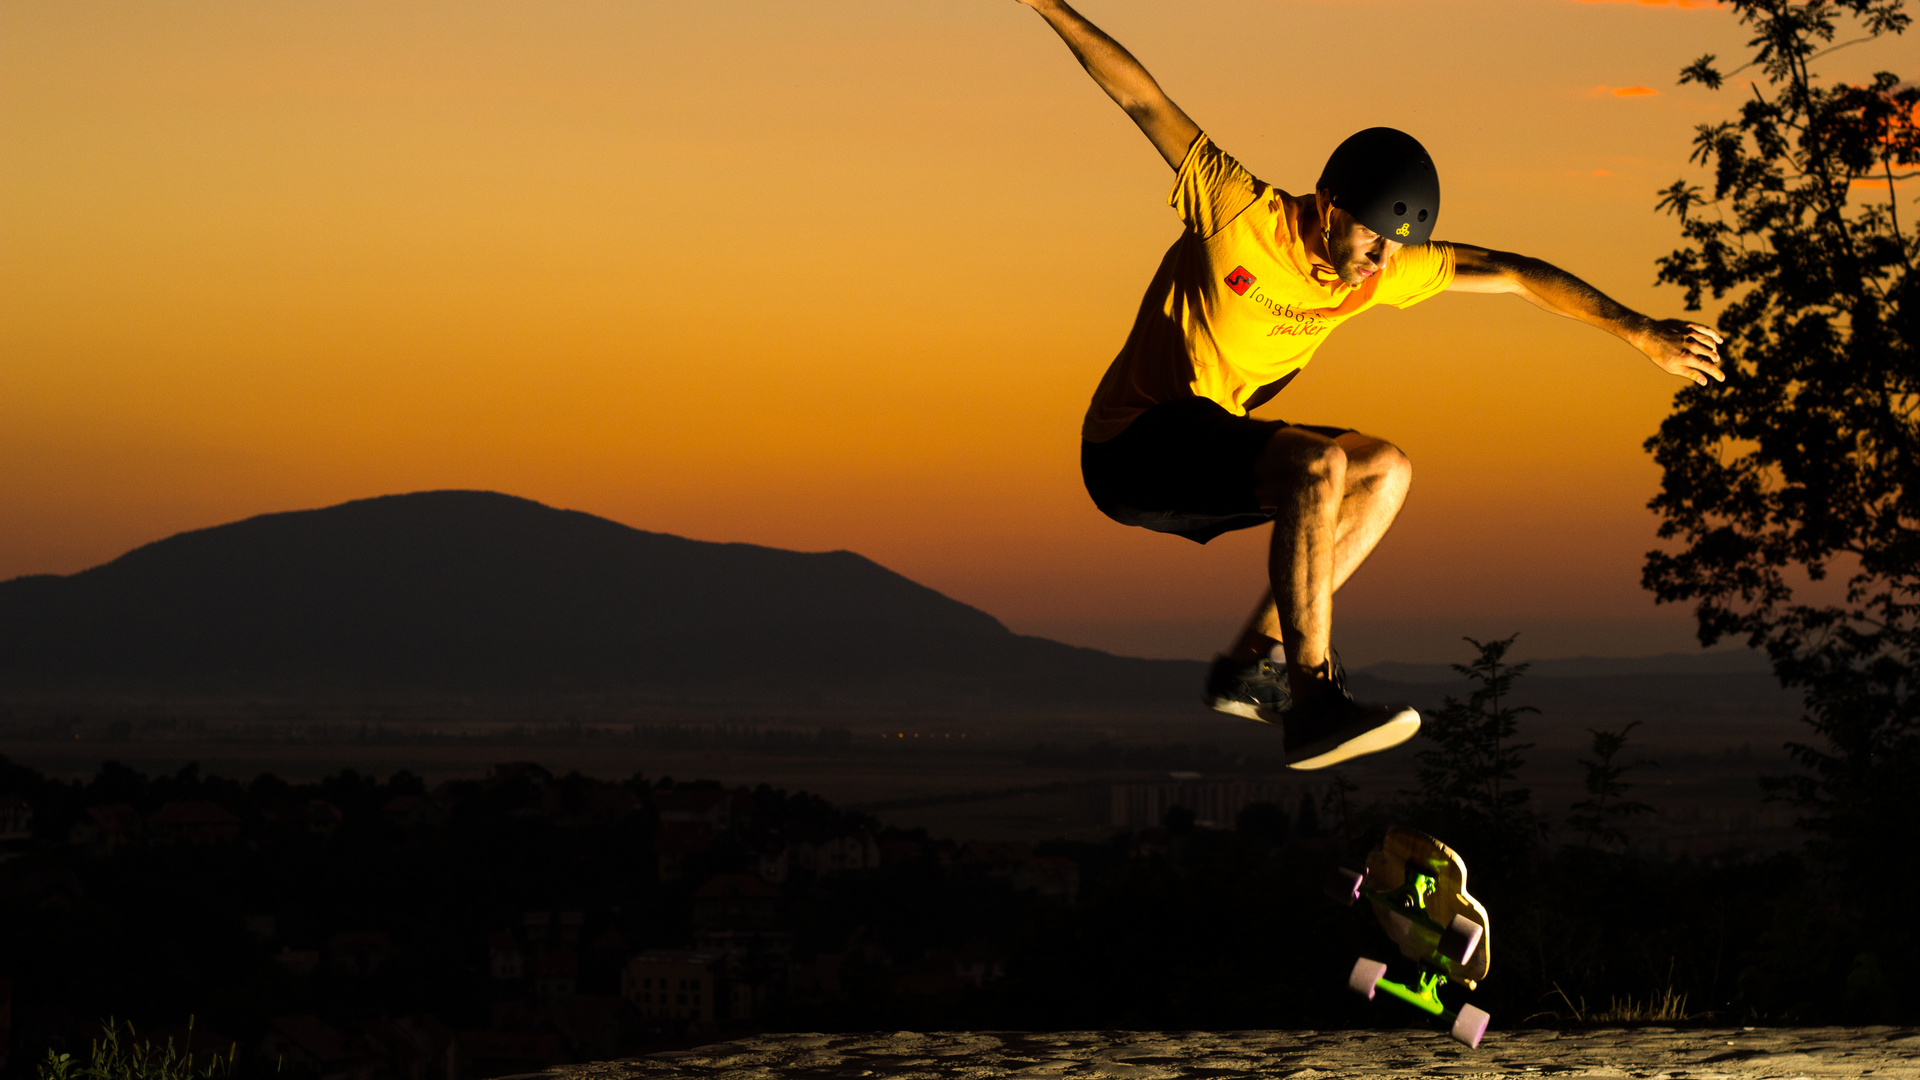 Related Wallpaper For Awesome Skateboard Photos